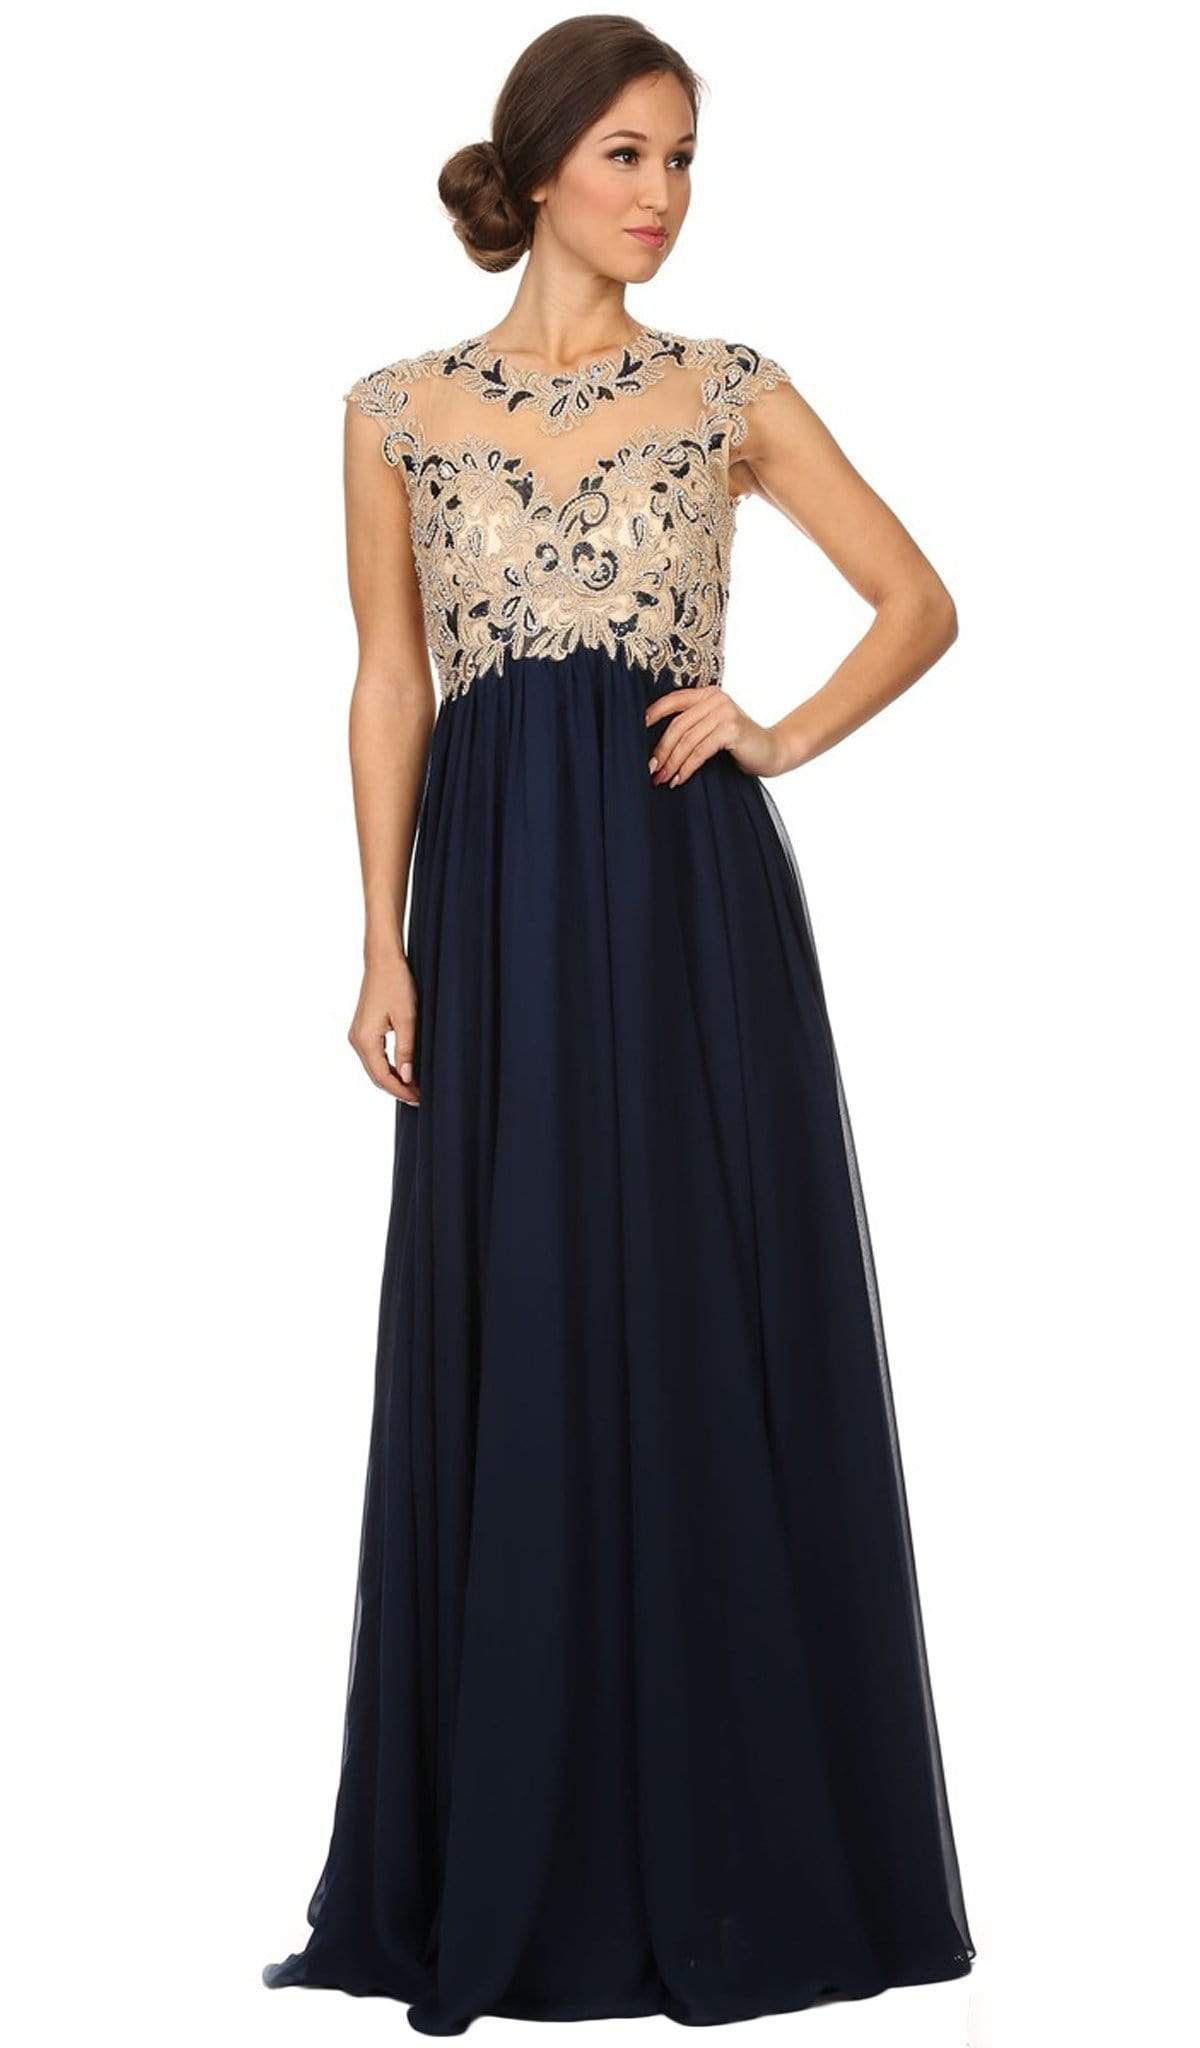 Eureka Fashion - Cap Sleeve Illusion Beaded Lace A-Line Evening Gown